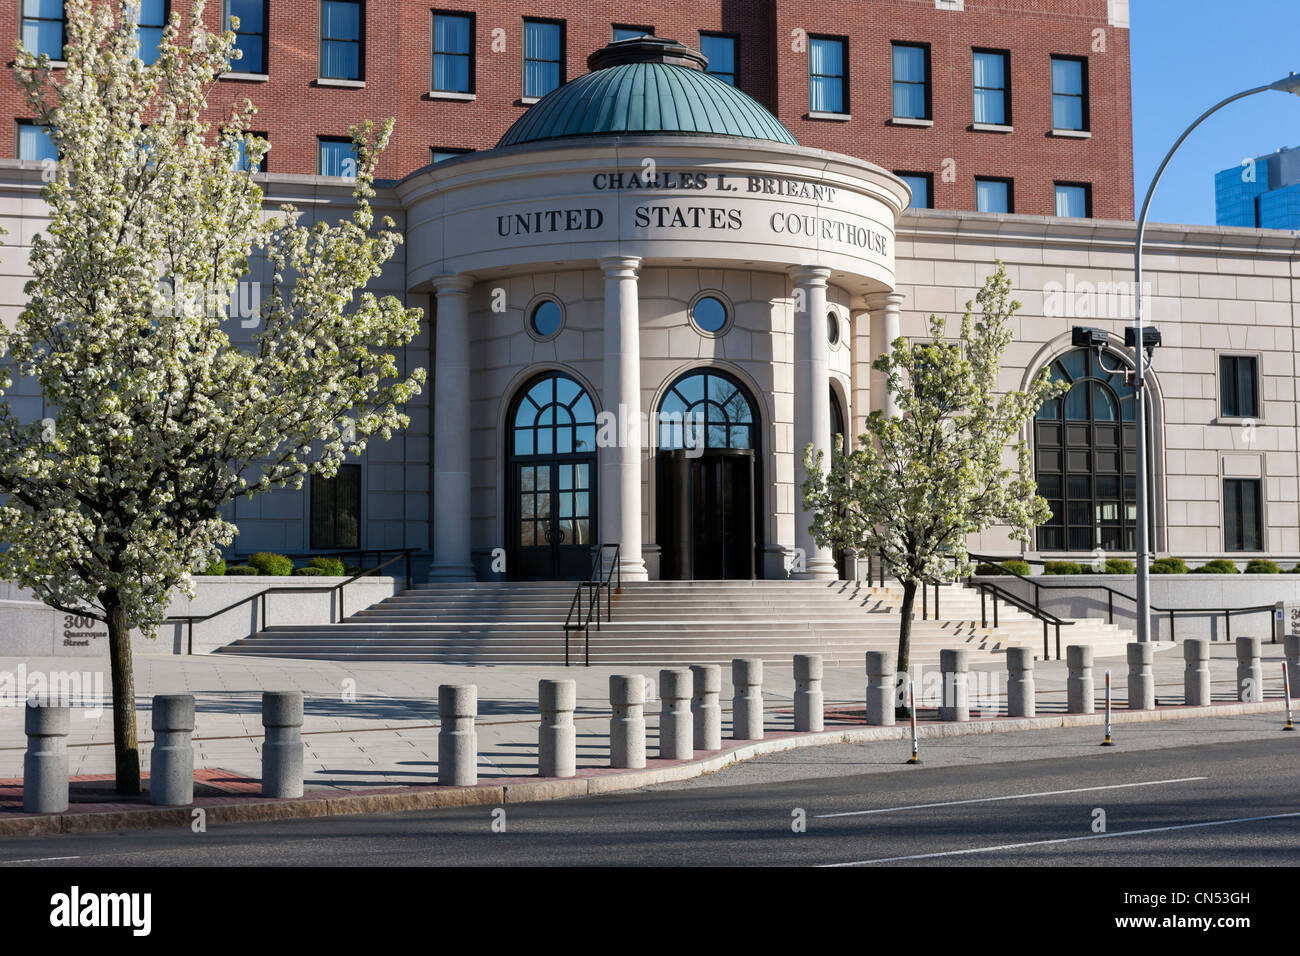 Die Charles L. Brieant United States Federal Building und Gerichtsgebäude (Southern District of New York) in White Plains, New York. Stockfoto